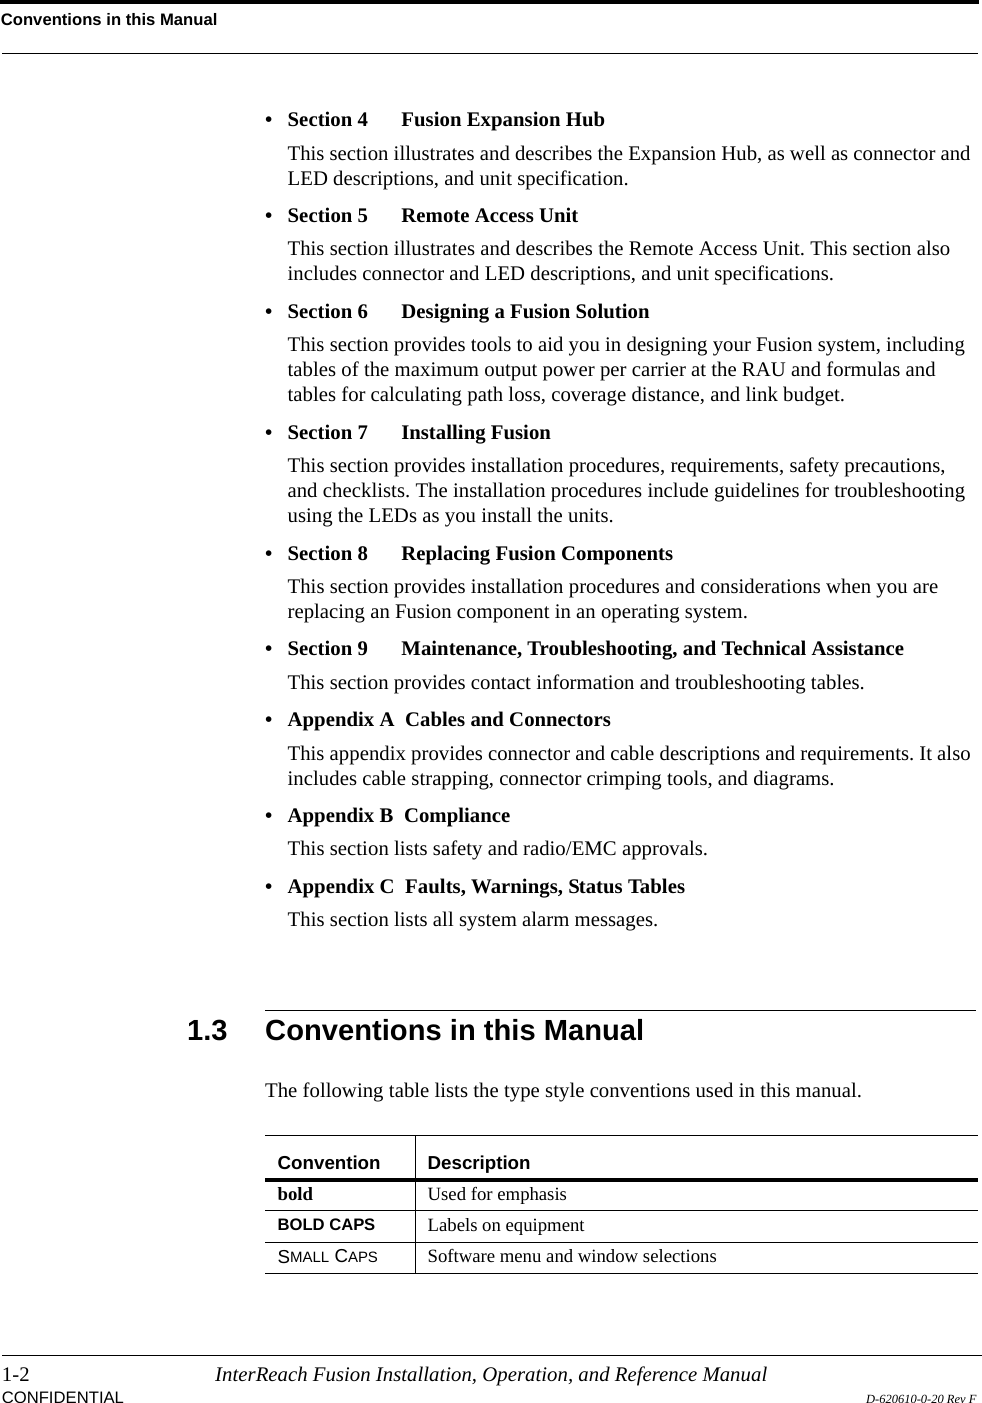 Conventions in this Manual1-2 InterReach Fusion Installation, Operation, and Reference ManualCONFIDENTIAL D-620610-0-20 Rev F• Section 4   Fusion Expansion HubThis section illustrates and describes the Expansion Hub, as well as connector and LED descriptions, and unit specification.• Section 5   Remote Access UnitThis section illustrates and describes the Remote Access Unit. This section also includes connector and LED descriptions, and unit specifications.• Section 6   Designing a Fusion SolutionThis section provides tools to aid you in designing your Fusion system, including tables of the maximum output power per carrier at the RAU and formulas and tables for calculating path loss, coverage distance, and link budget.• Section 7  Installing FusionThis section provides installation procedures, requirements, safety precautions, and checklists. The installation procedures include guidelines for troubleshooting using the LEDs as you install the units.• Section 8   Replacing Fusion ComponentsThis section provides installation procedures and considerations when you are replacing an Fusion component in an operating system.• Section 9  Maintenance, Troubleshooting, and Technical AssistanceThis section provides contact information and troubleshooting tables.• Appendix A  Cables and ConnectorsThis appendix provides connector and cable descriptions and requirements. It also includes cable strapping, connector crimping tools, and diagrams.• Appendix B  ComplianceThis section lists safety and radio/EMC approvals.• Appendix C  Faults, Warnings, Status TablesThis section lists all system alarm messages.1.3 Conventions in this ManualThe following table lists the type style conventions used in this manual.Convention Descriptionbold Used for emphasisBOLD CAPS Labels on equipmentSMALL CAPS Software menu and window selections